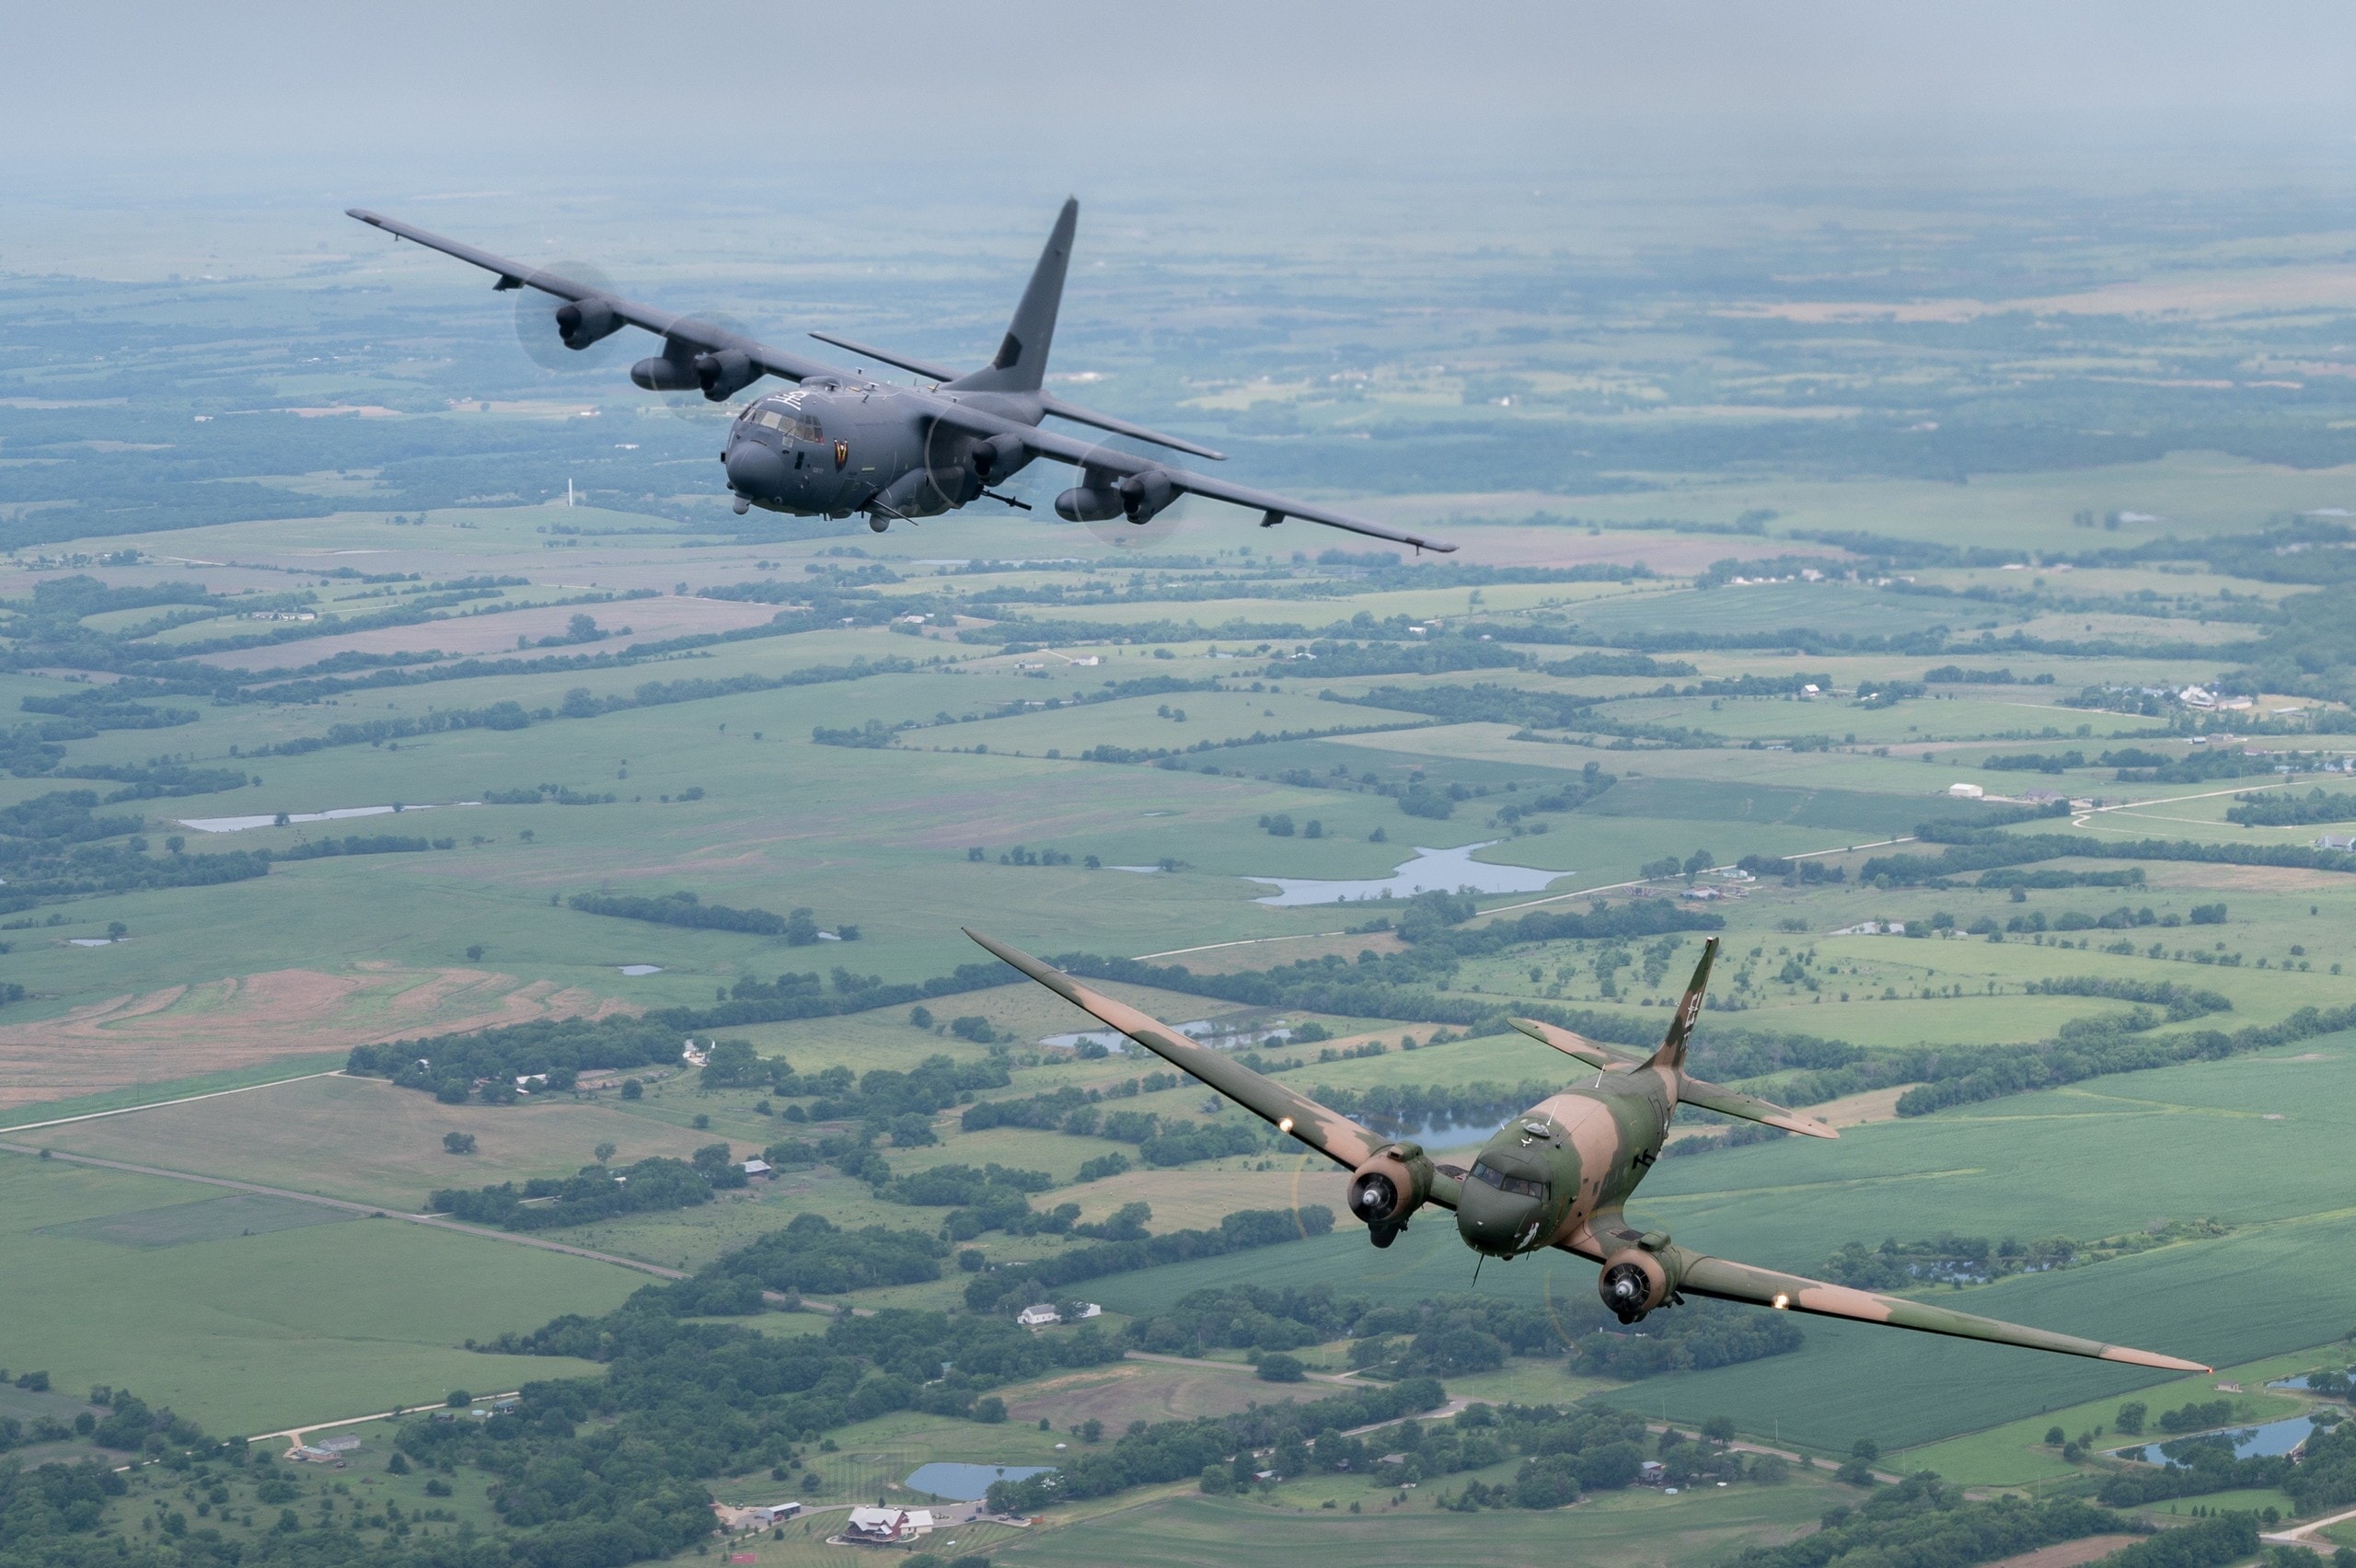 AC-47 Spooky Meets with AC-130J Ghostrider in the Air, One Is Decades Older - autoevolution